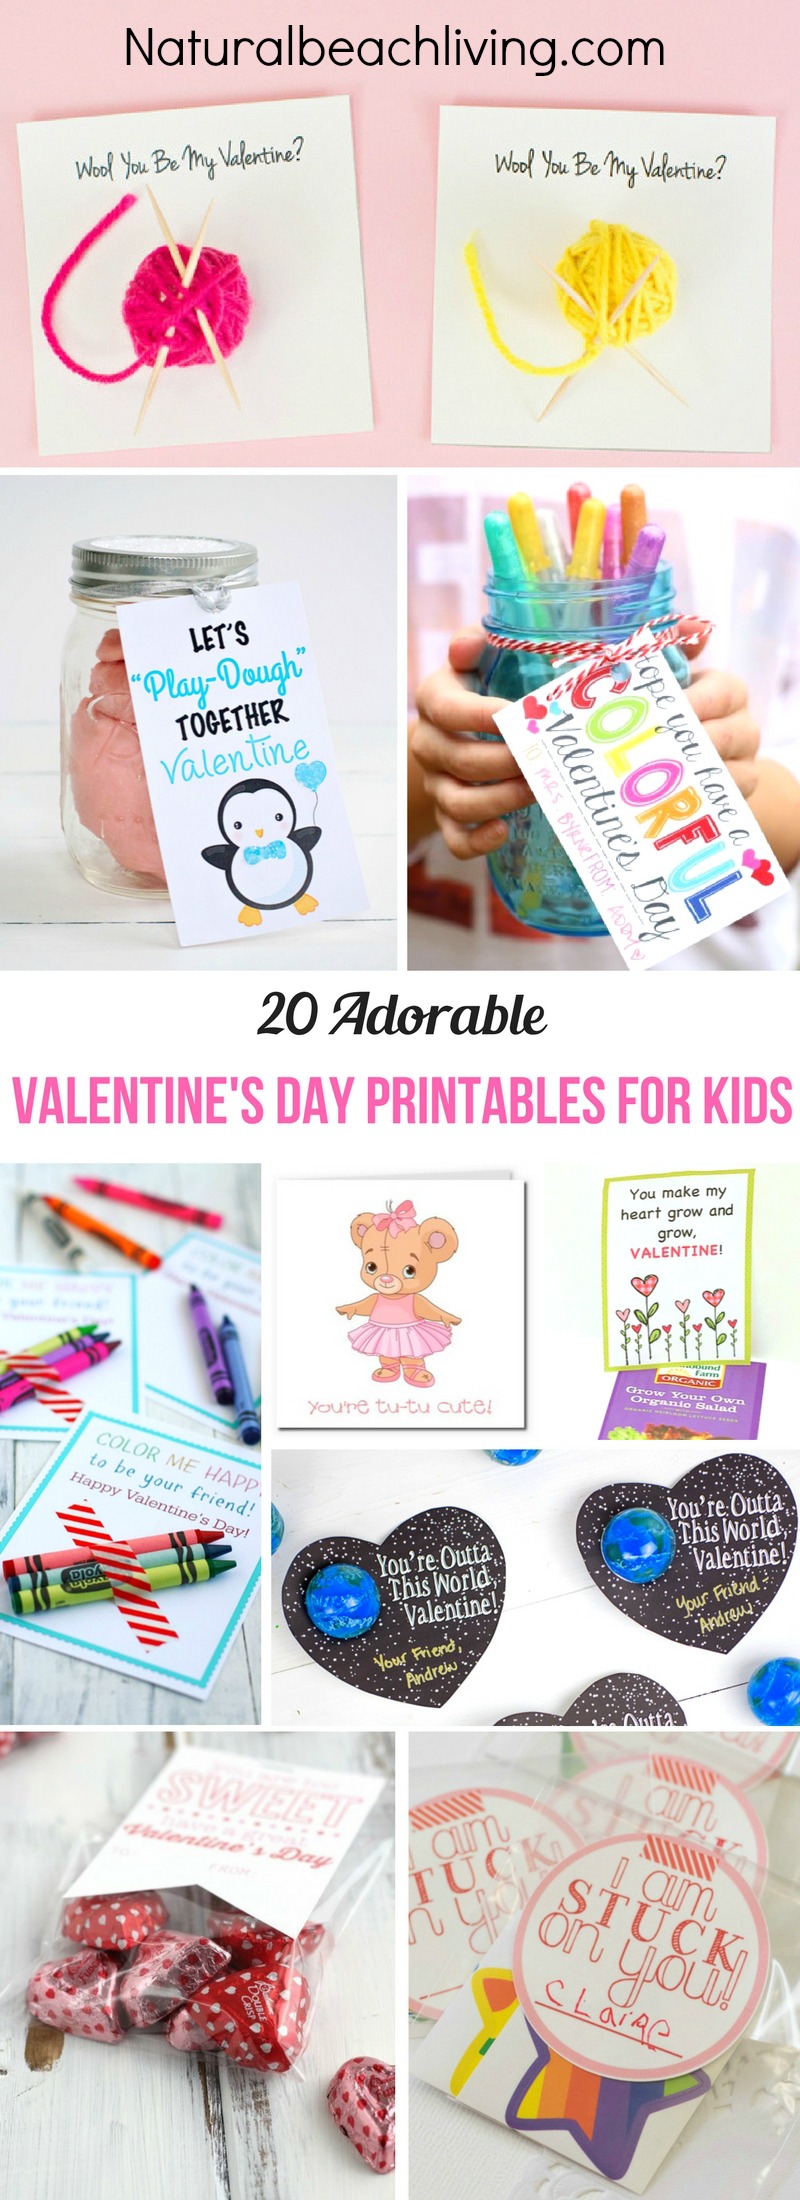 The Best Valentine Printables for Kids, Non-Candy Valentines ideas, Valentine's Day Cards, Today we are sharing over 40 Free Valentine's Day Cards for Kids, Valentines ideas and activities, Valentine's Day Party Ideas and more